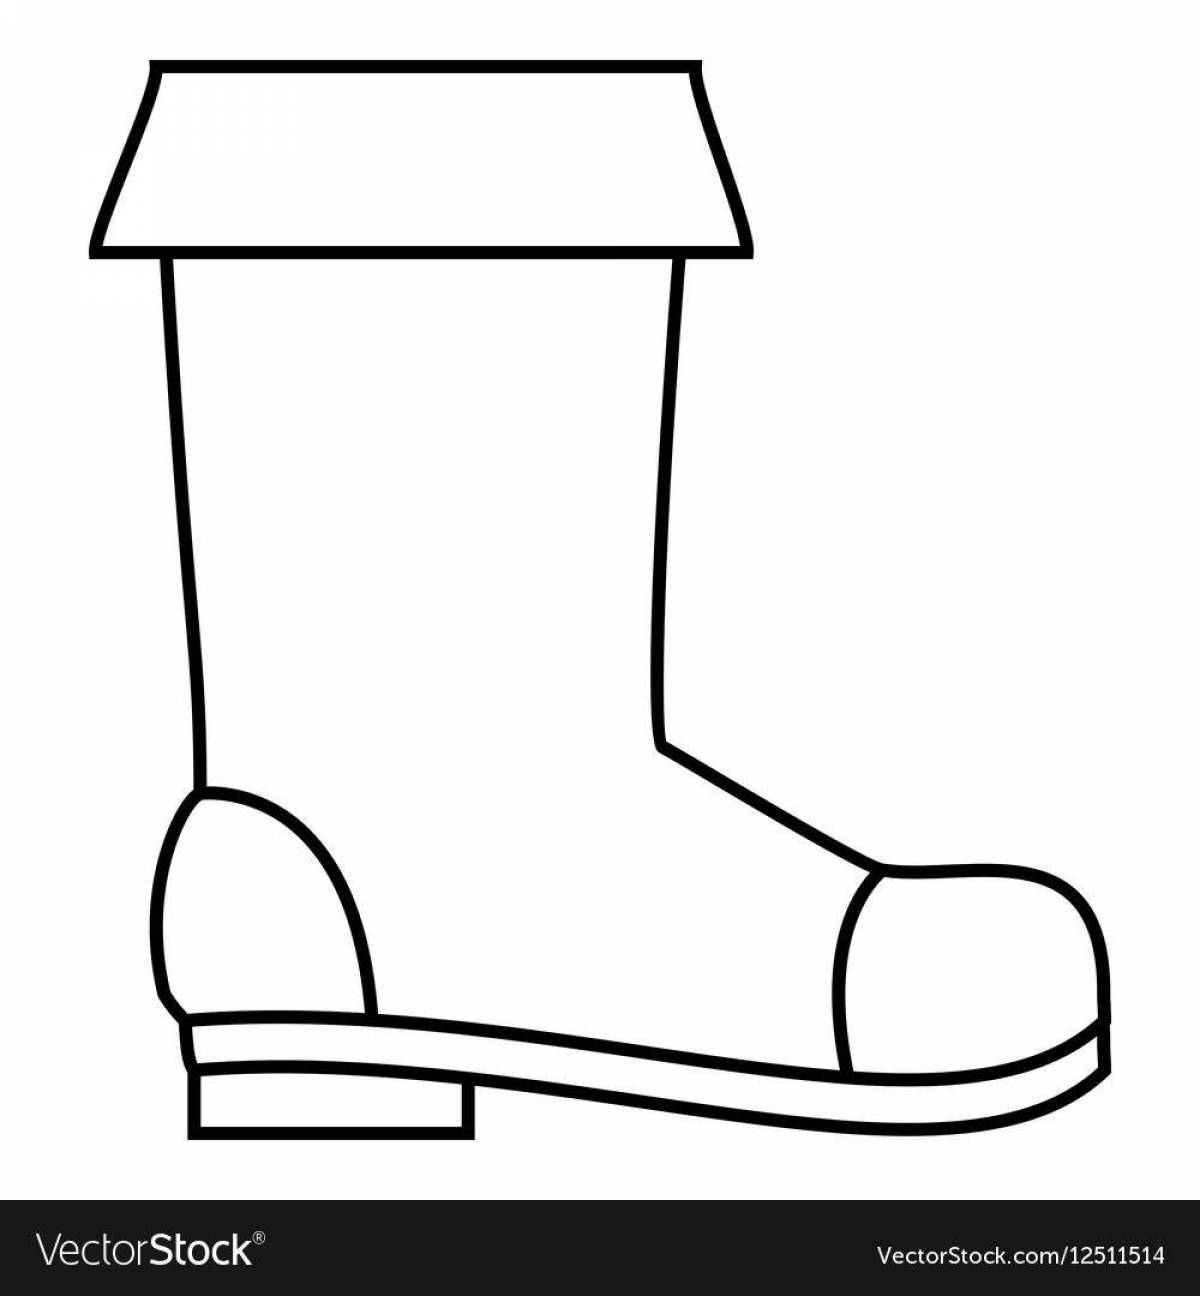 Distinguished Wellingtons coloring page